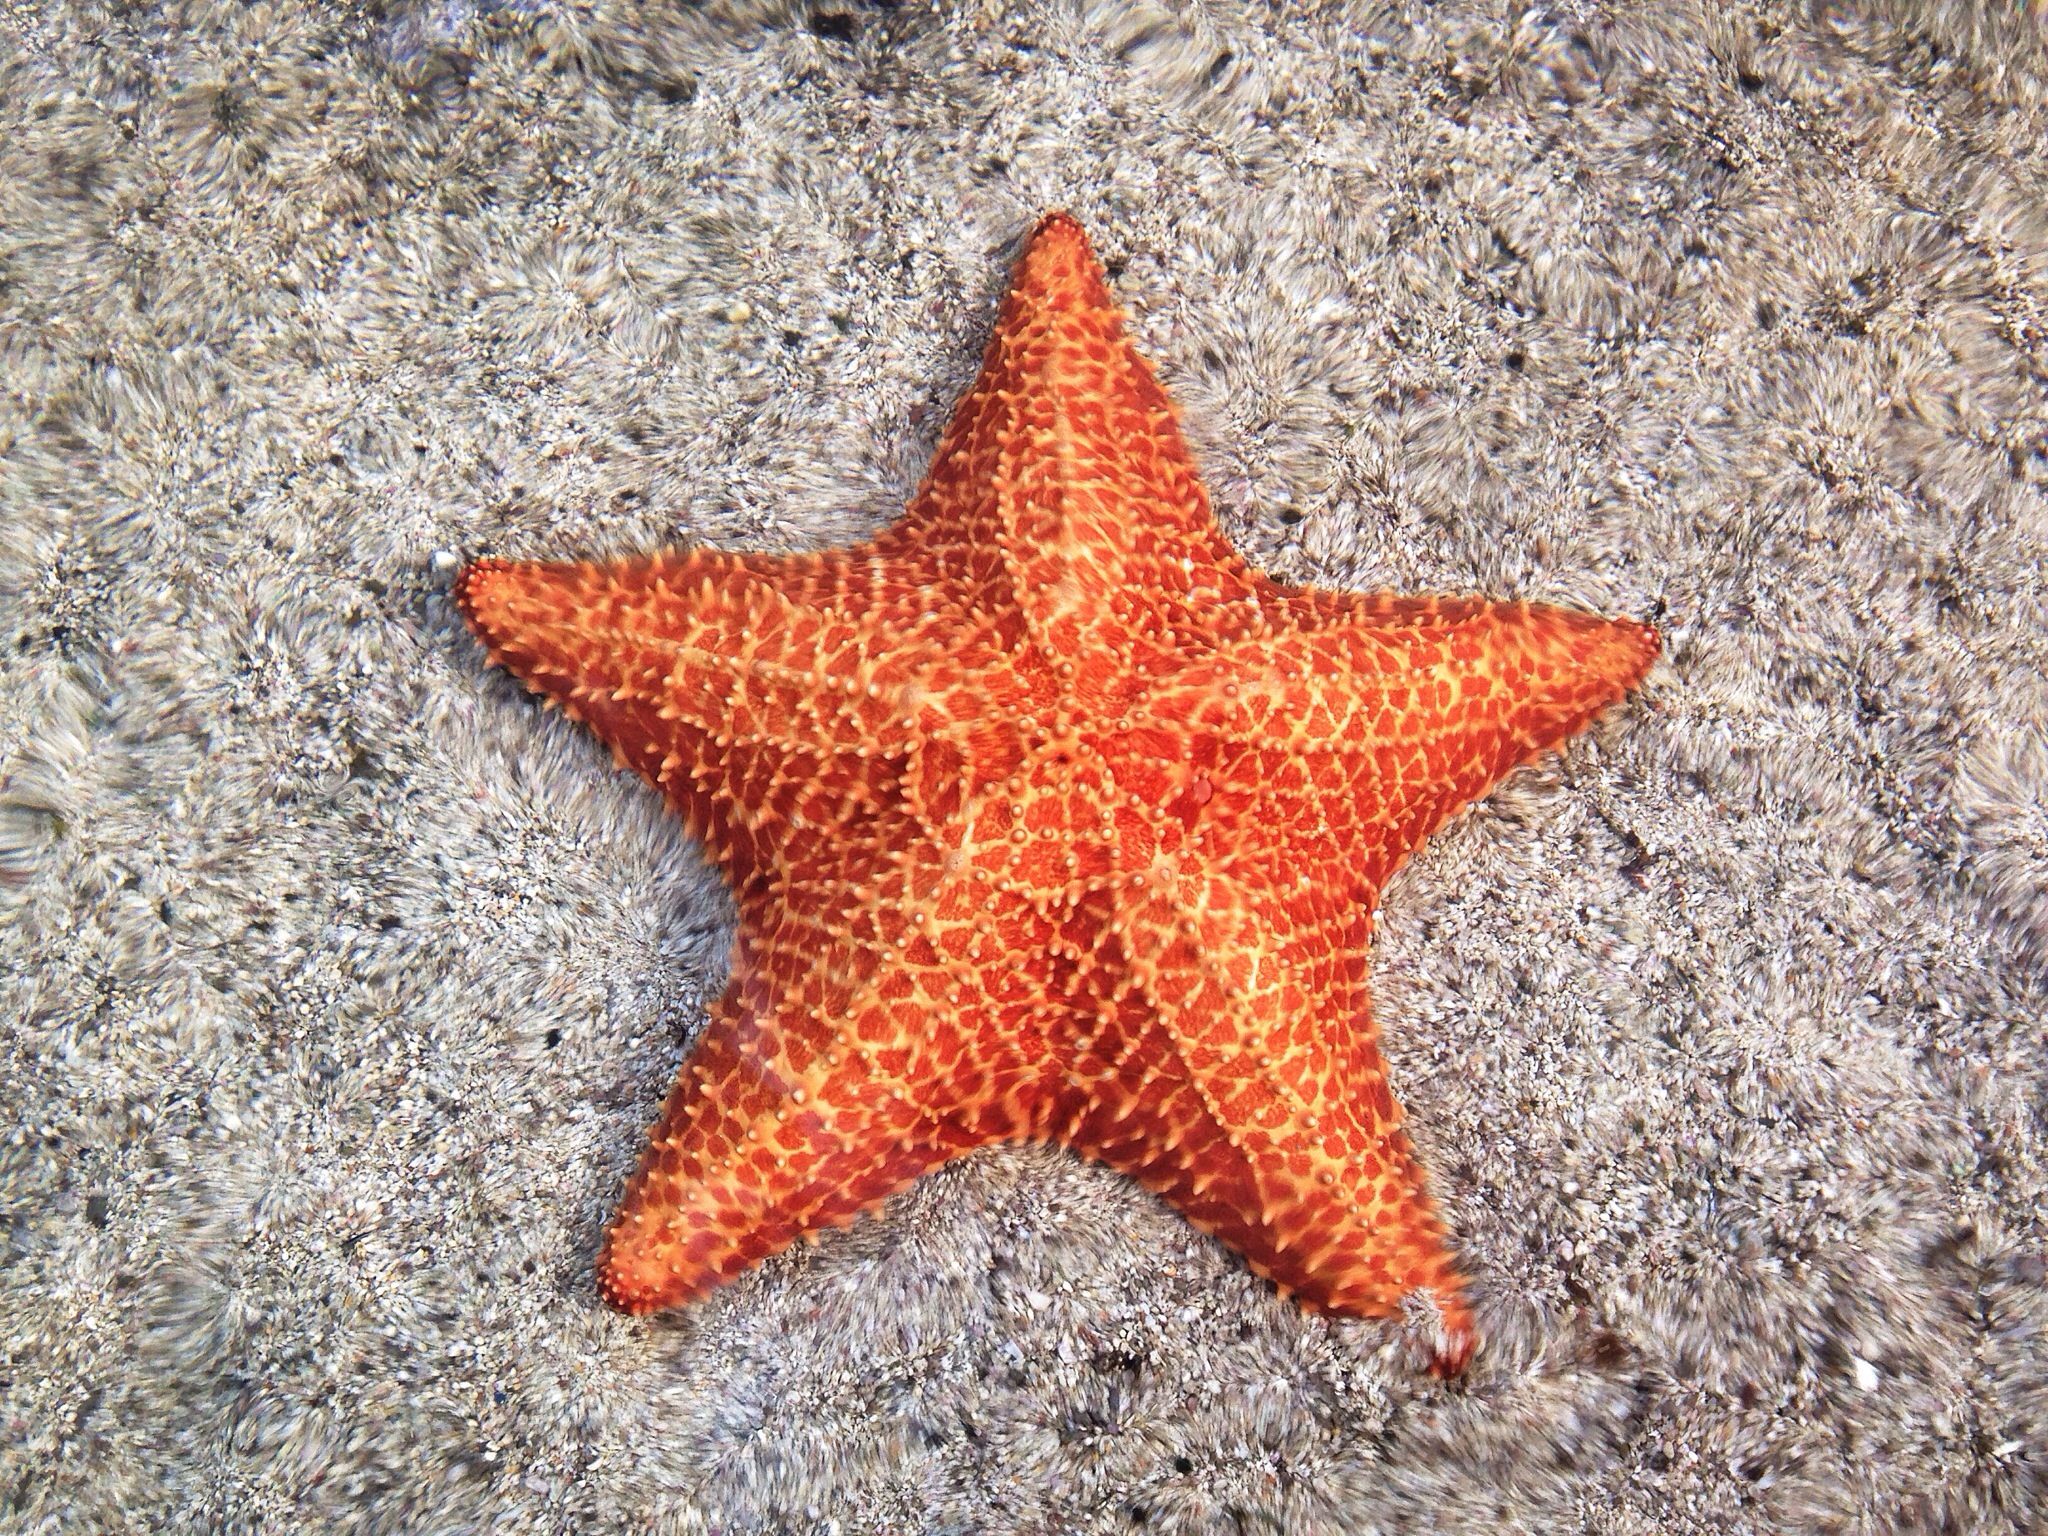 Interesting facts about starfish